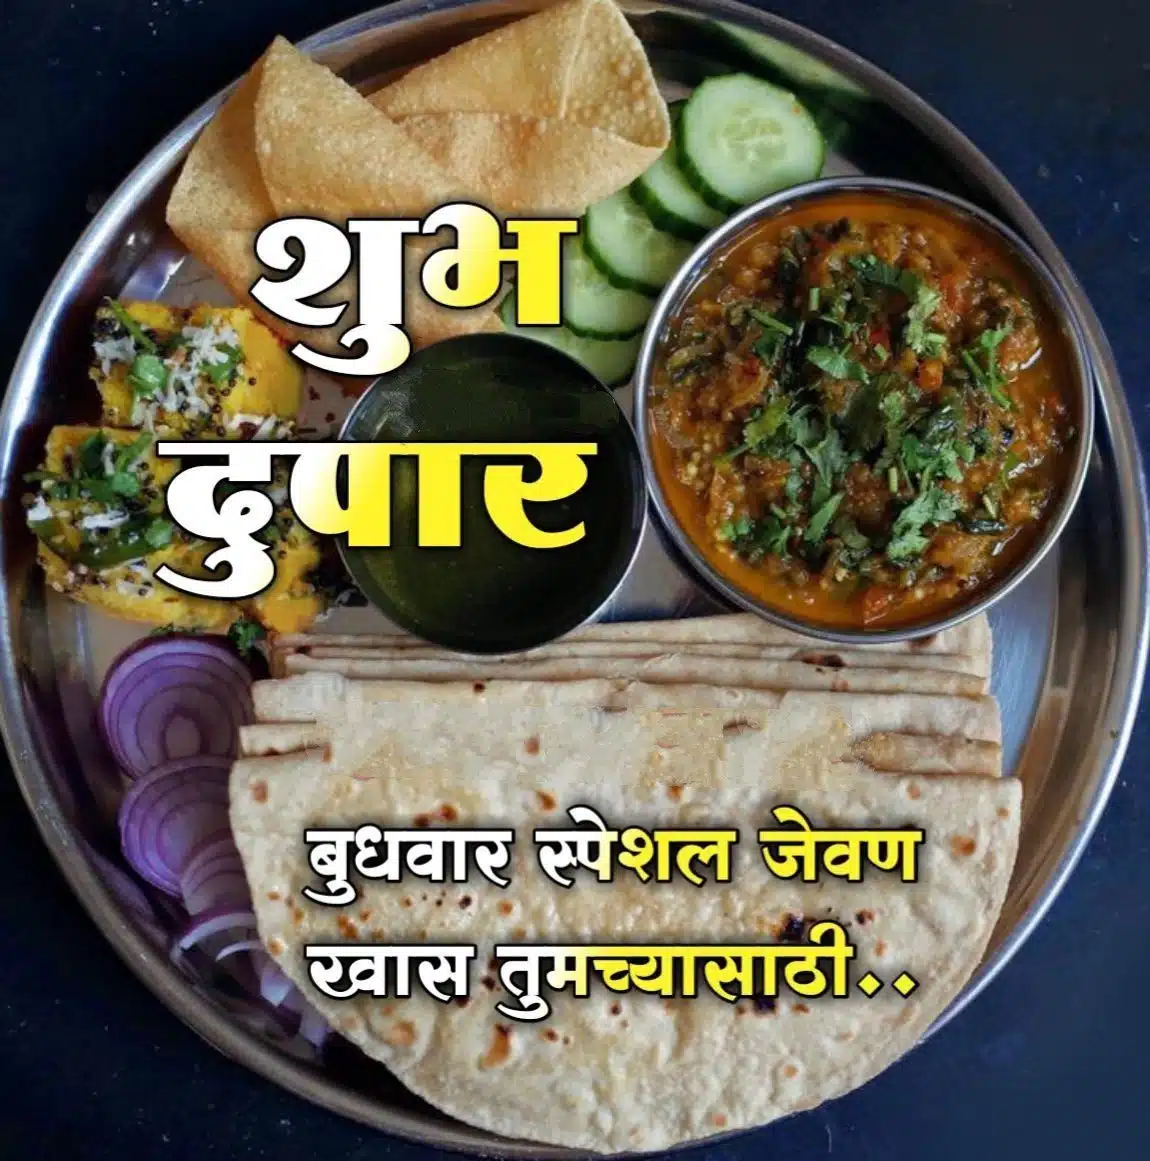 Lunch Good Afternoon In Marathi (11)